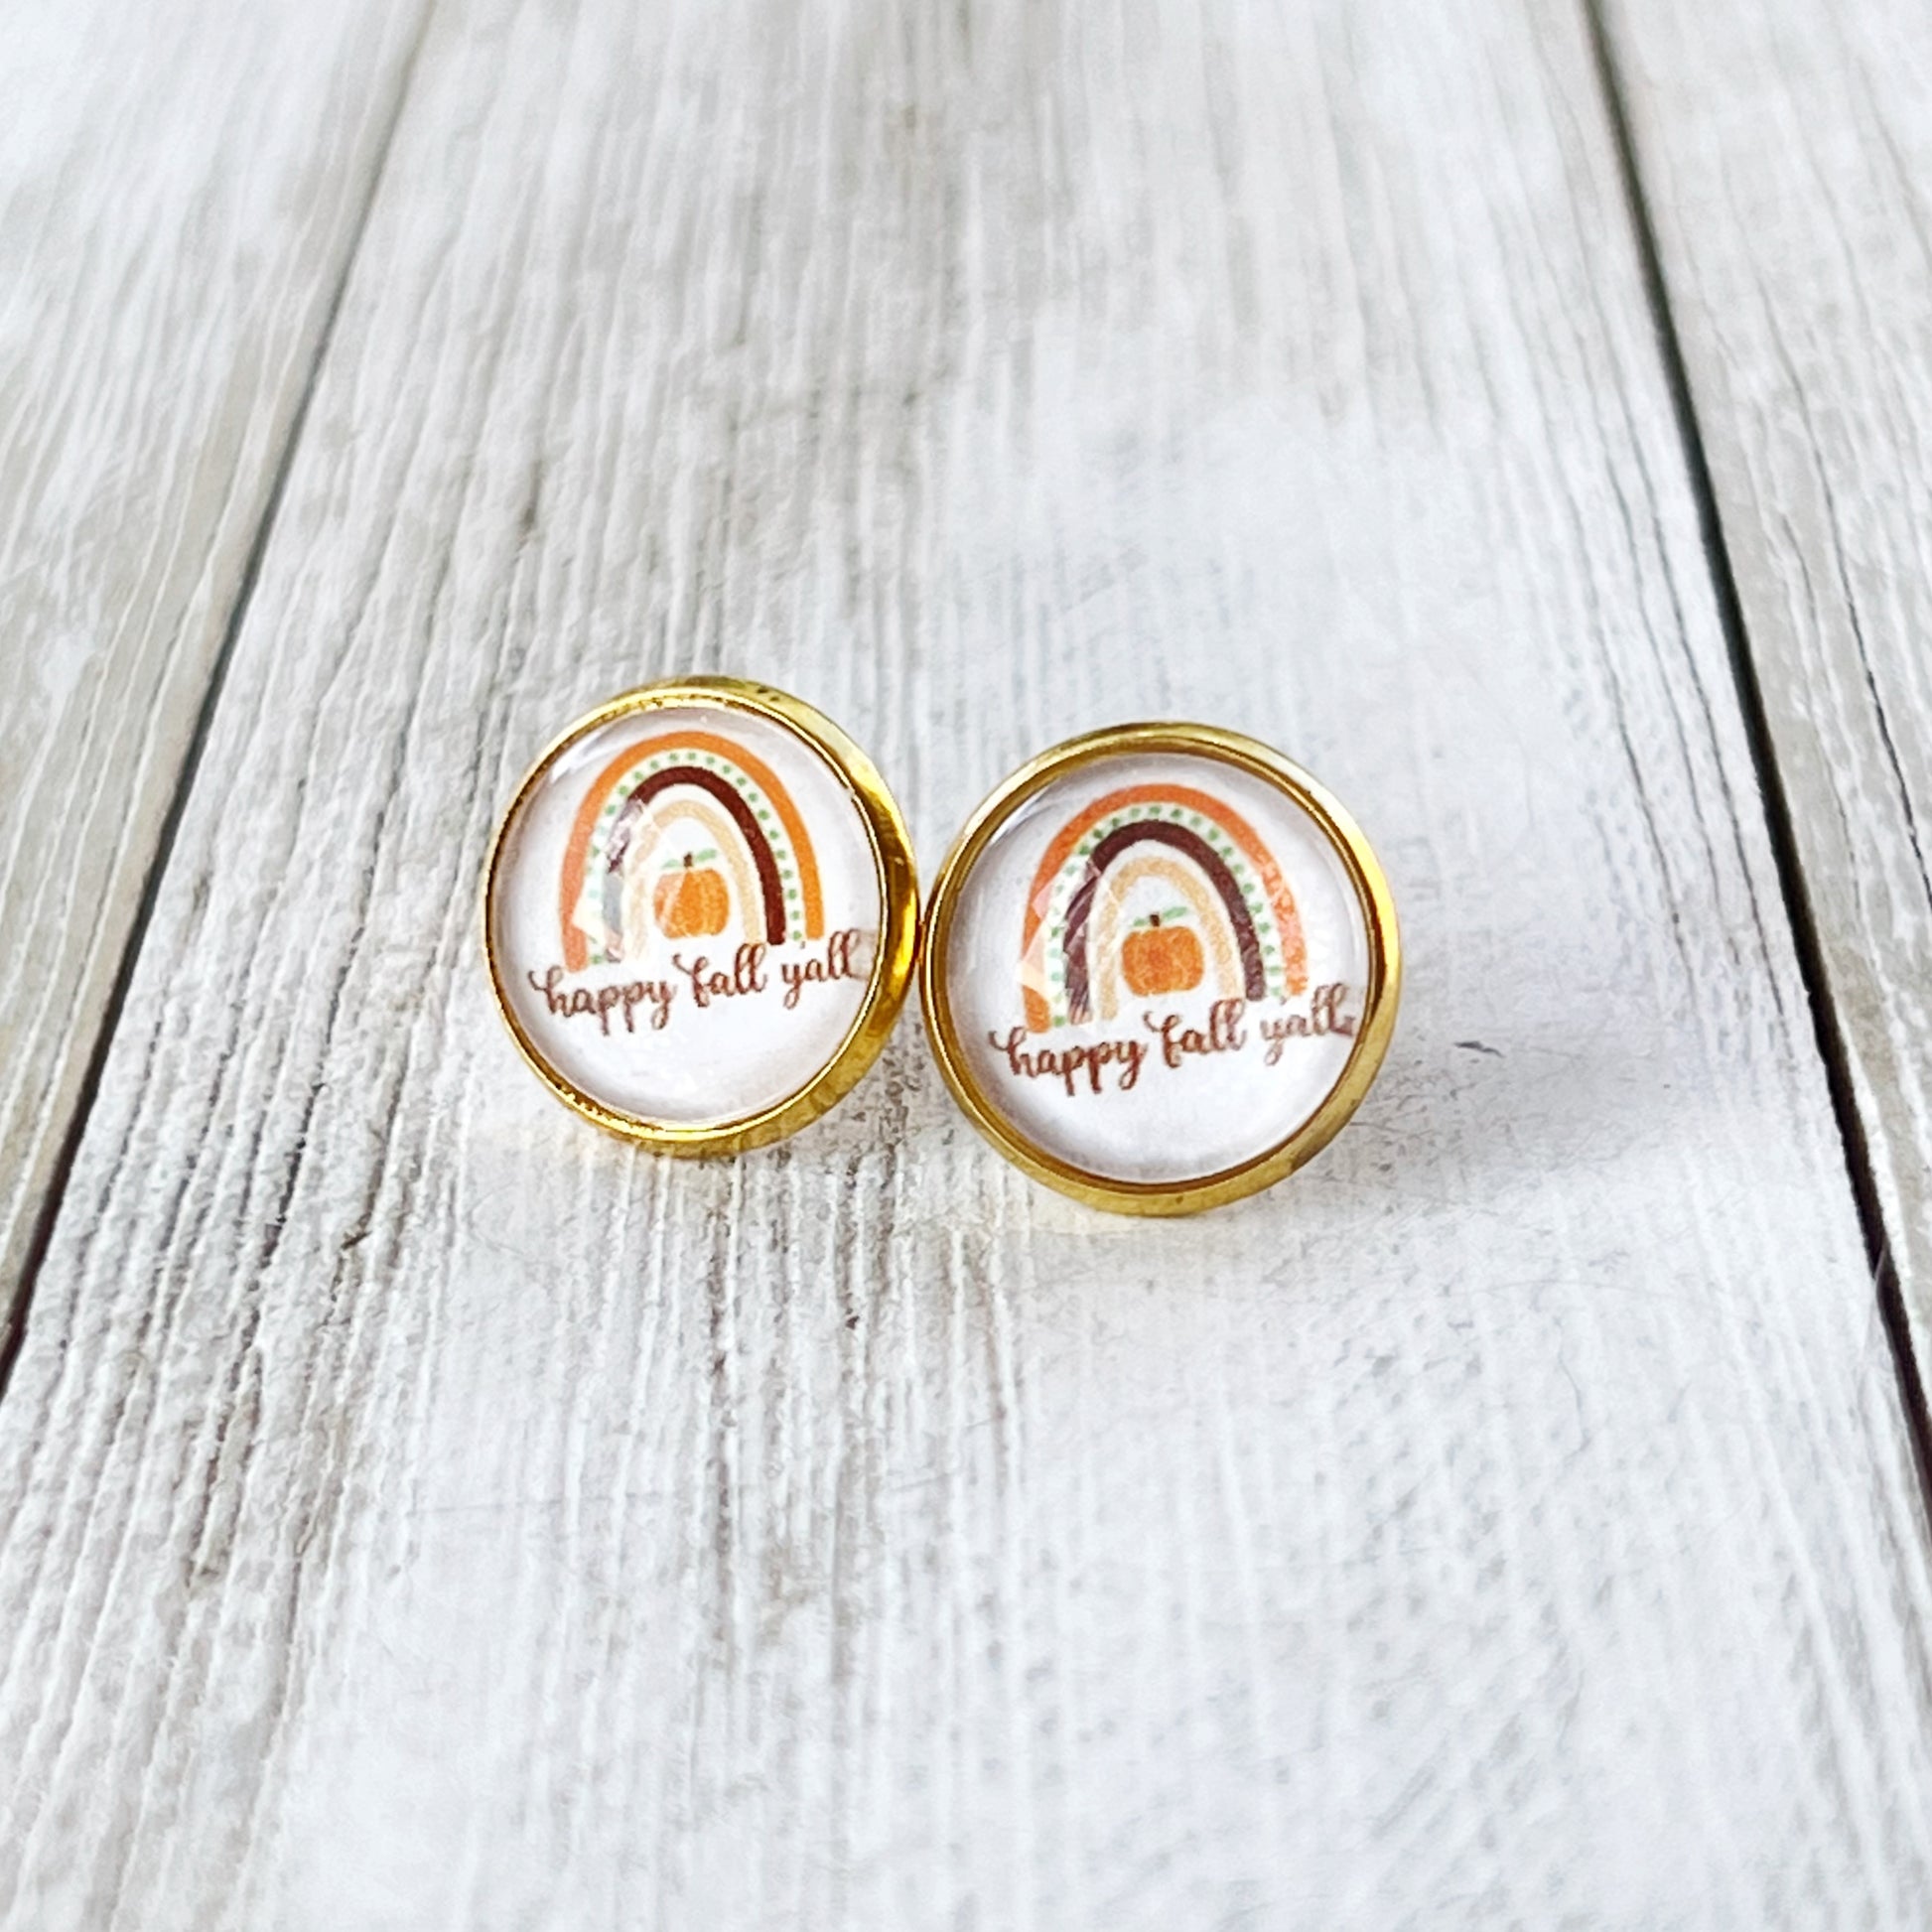 Boho Rainbow Happy Fall Y’all Gold Stud Earrings - Colorful & Festive Autumn Accessories